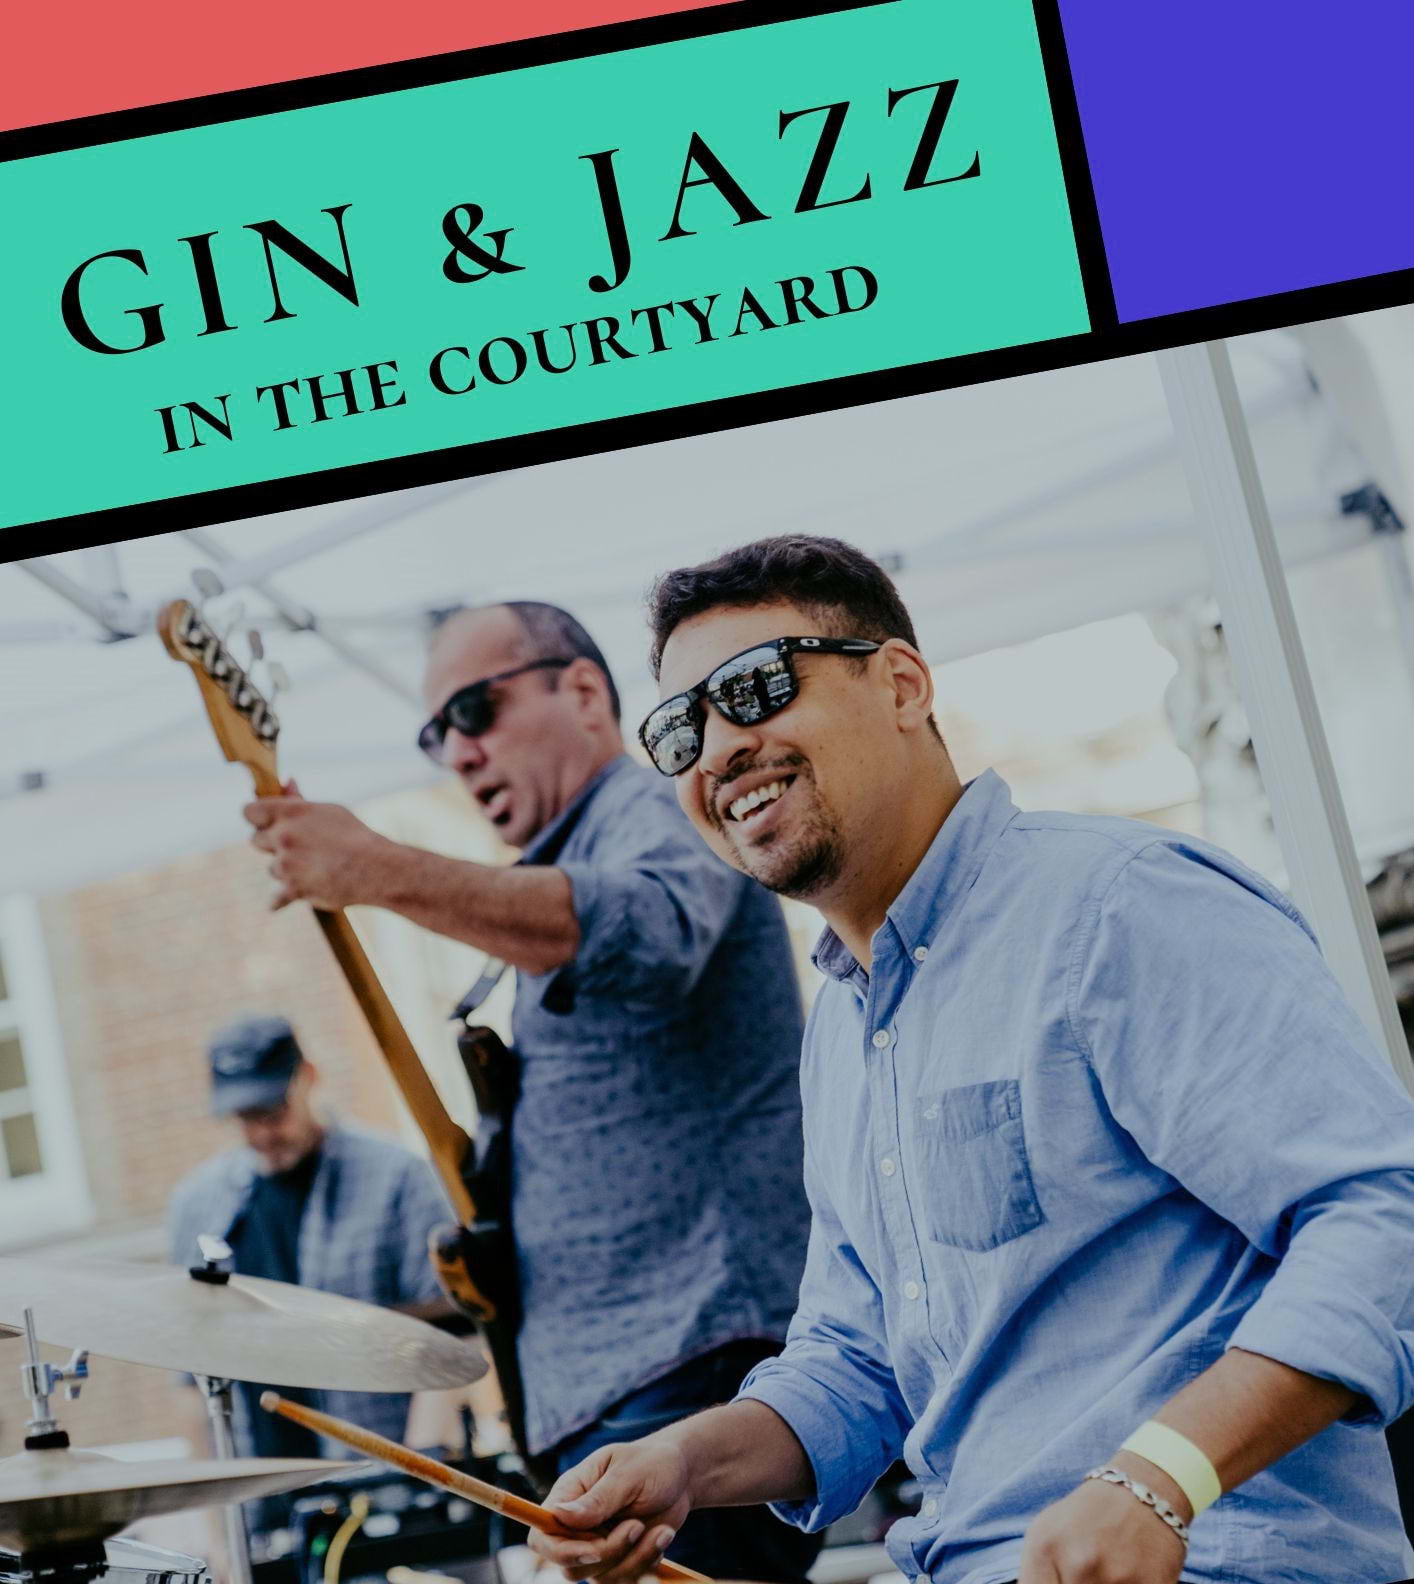 Enjoy Gin & Jazz nights at the enchanting St James's Church until the end of August